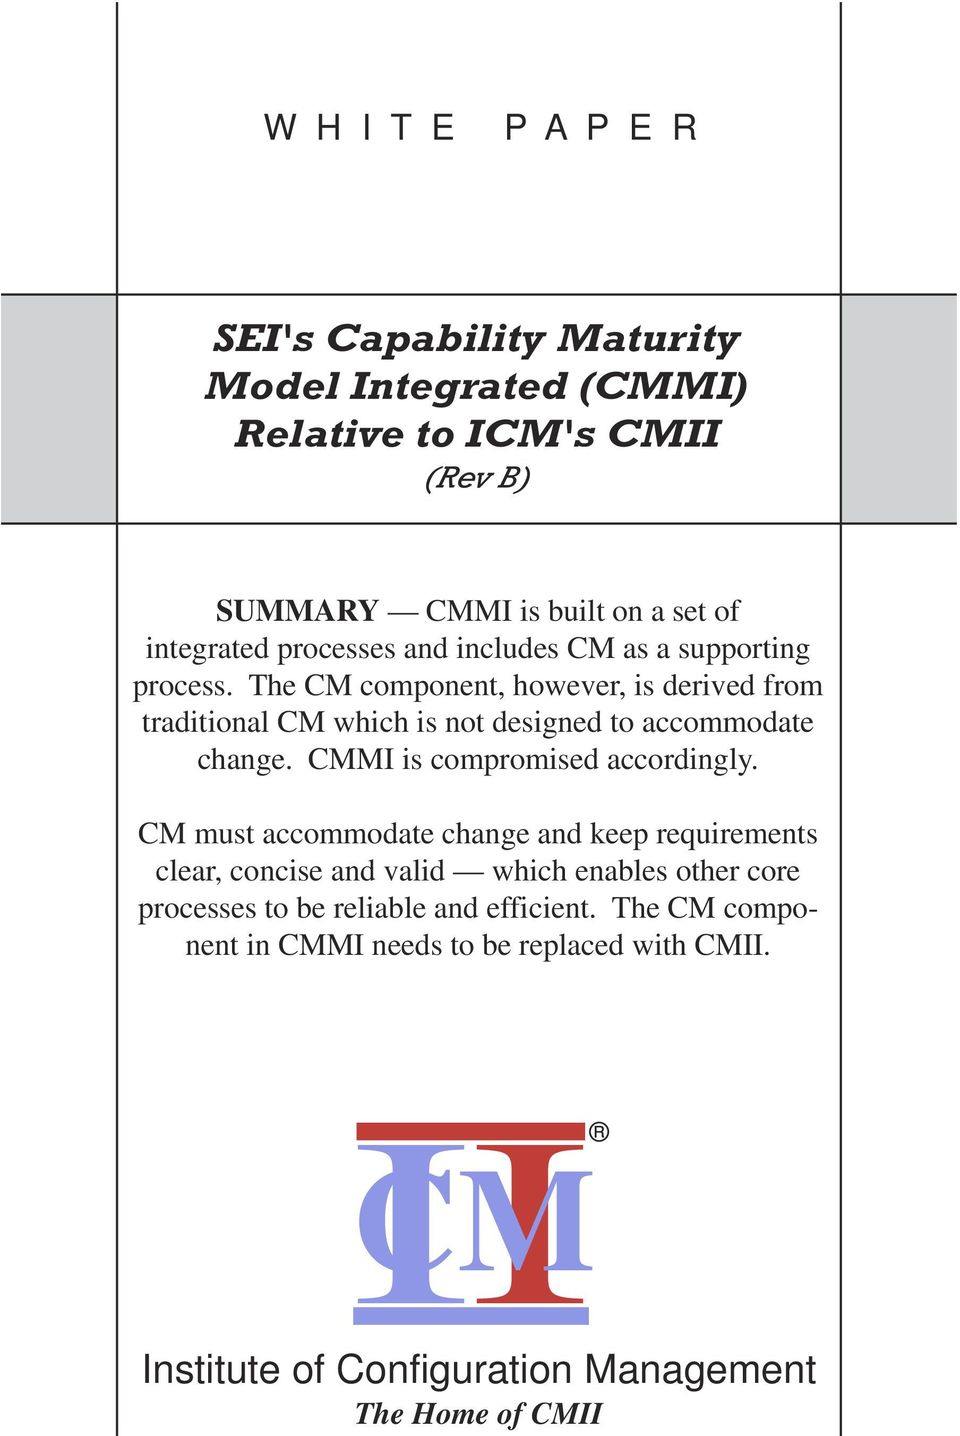 The CM component, however, is derived from traditional CM which is not designed to accommodate change. CMMI is compromised accordingly.